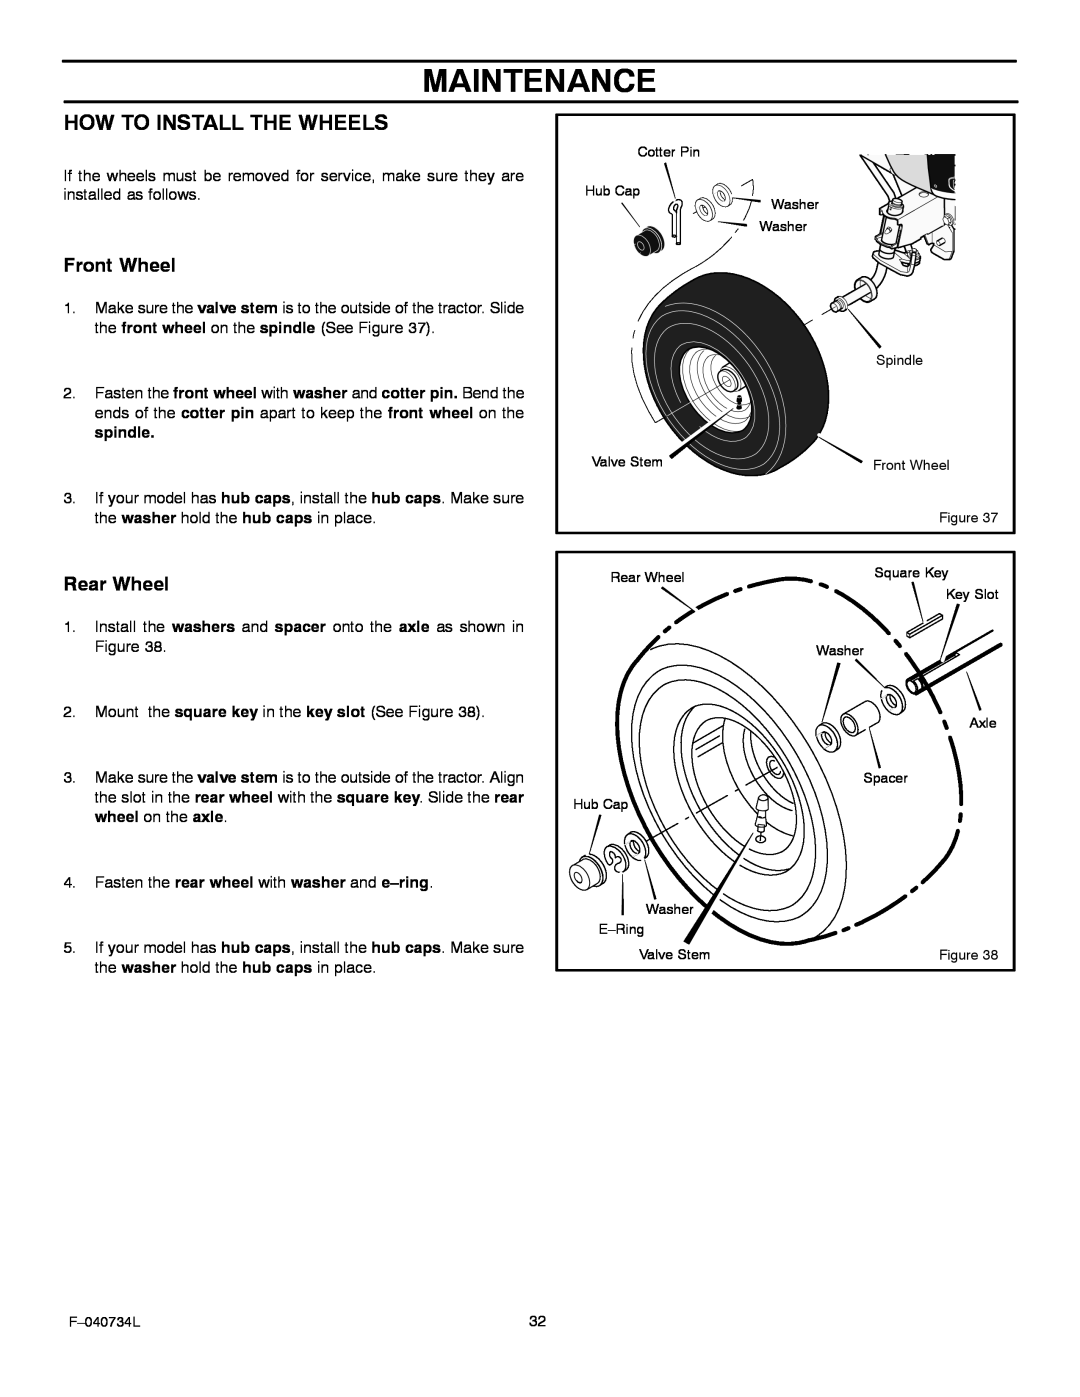 Murray 425015x92A manual Maintenance, How To Install The Wheels, Front Wheel, Rear Wheel 